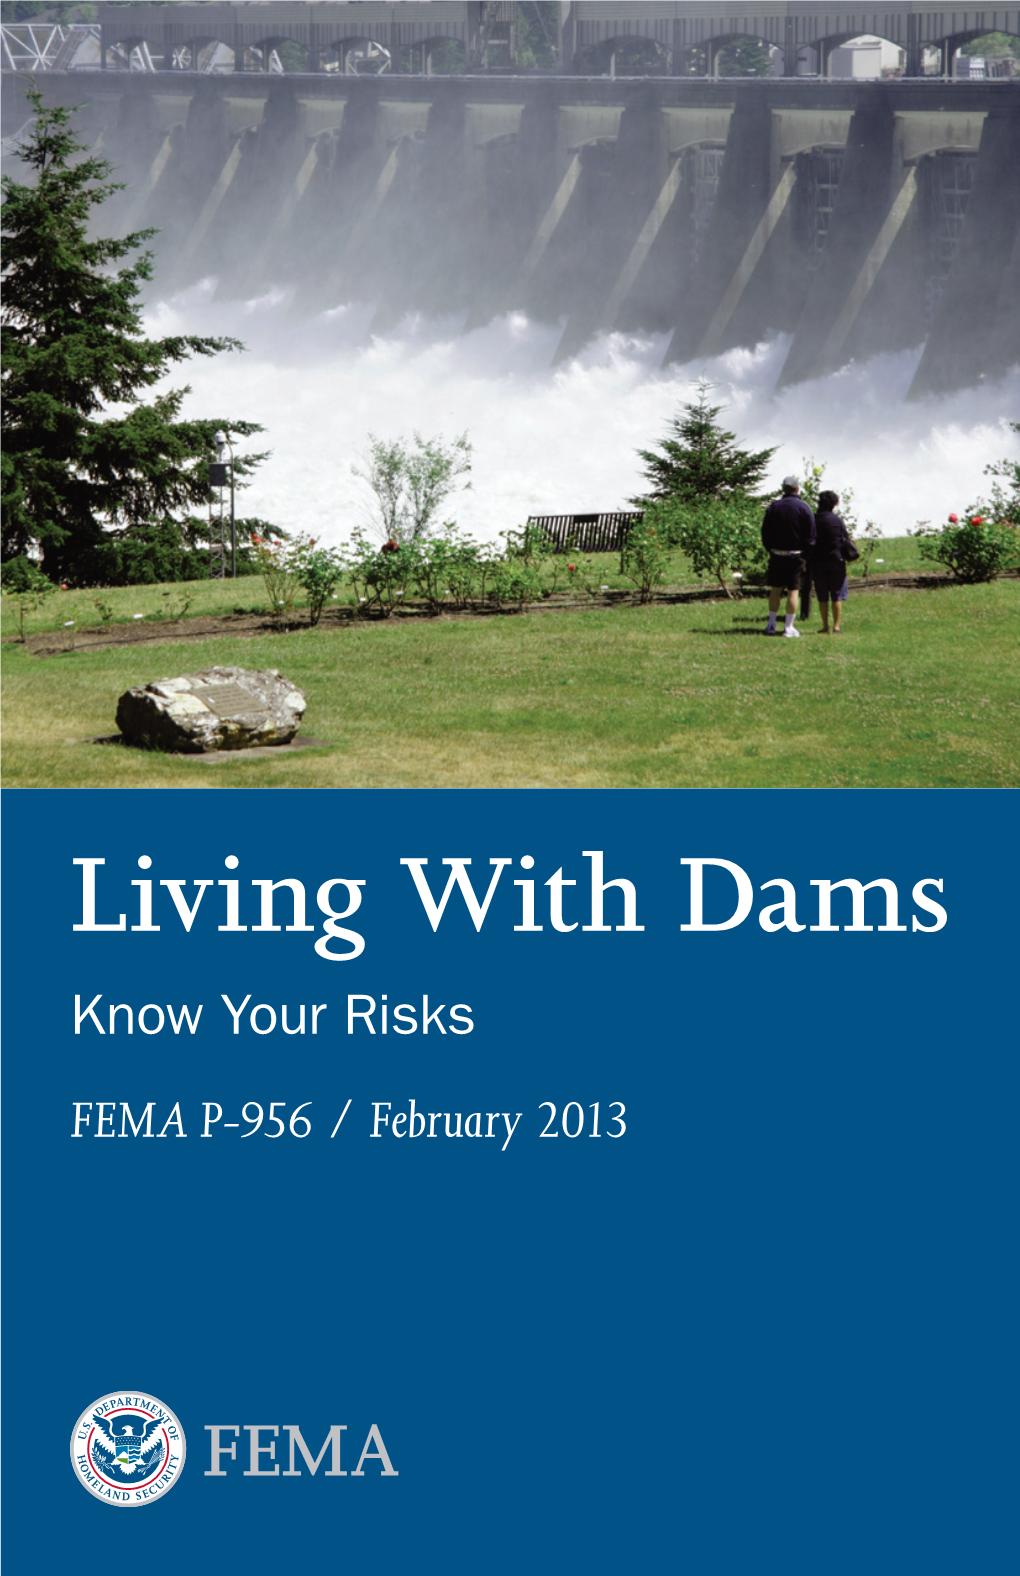 Living with Dams: Know Your Risk